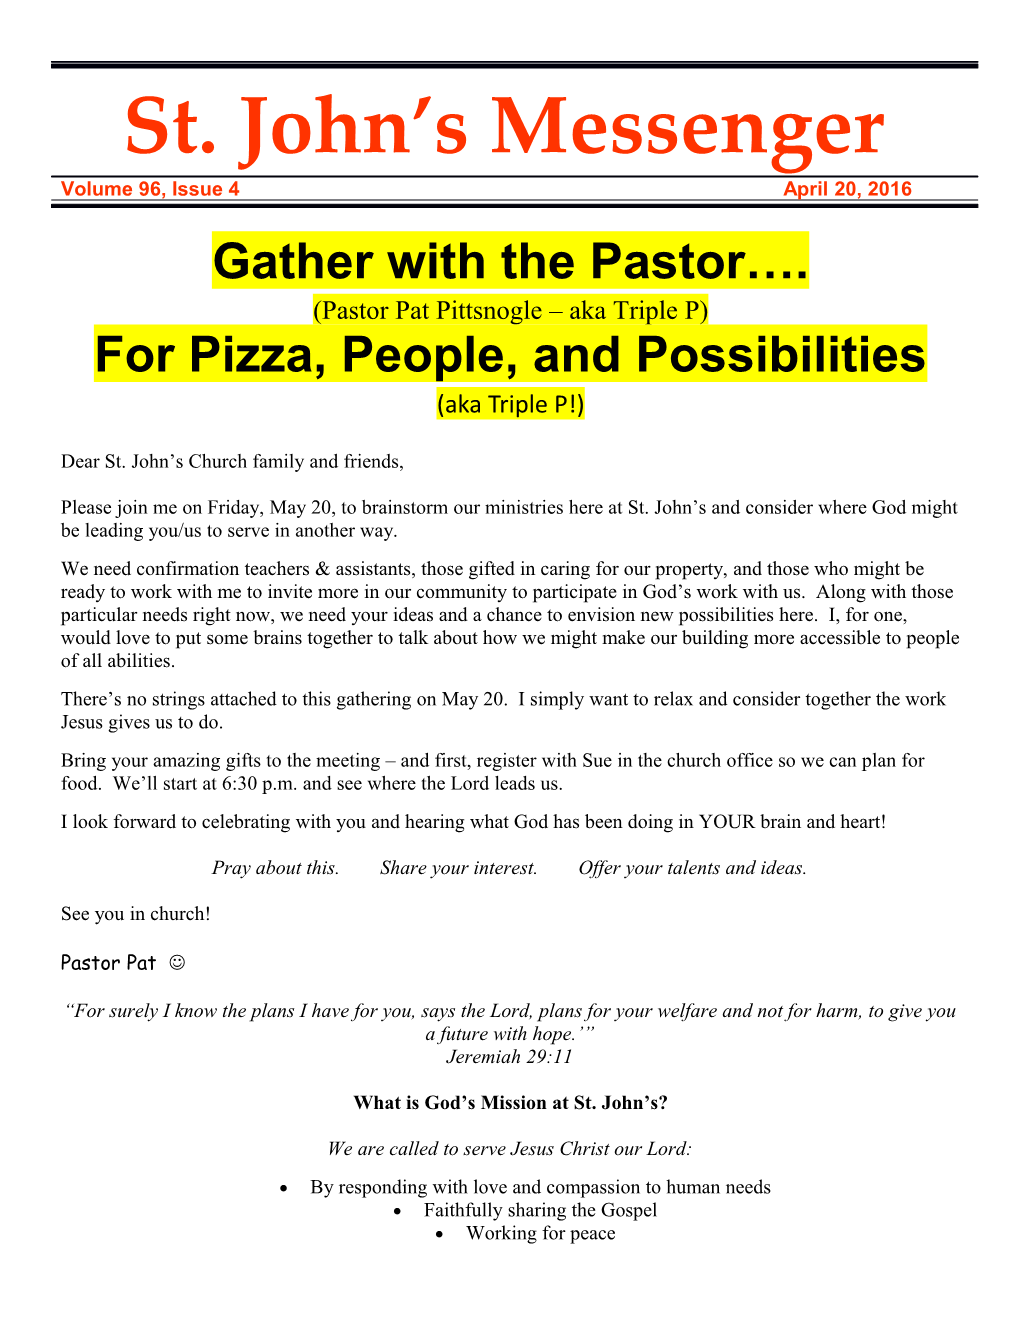 Gather with the Pastor